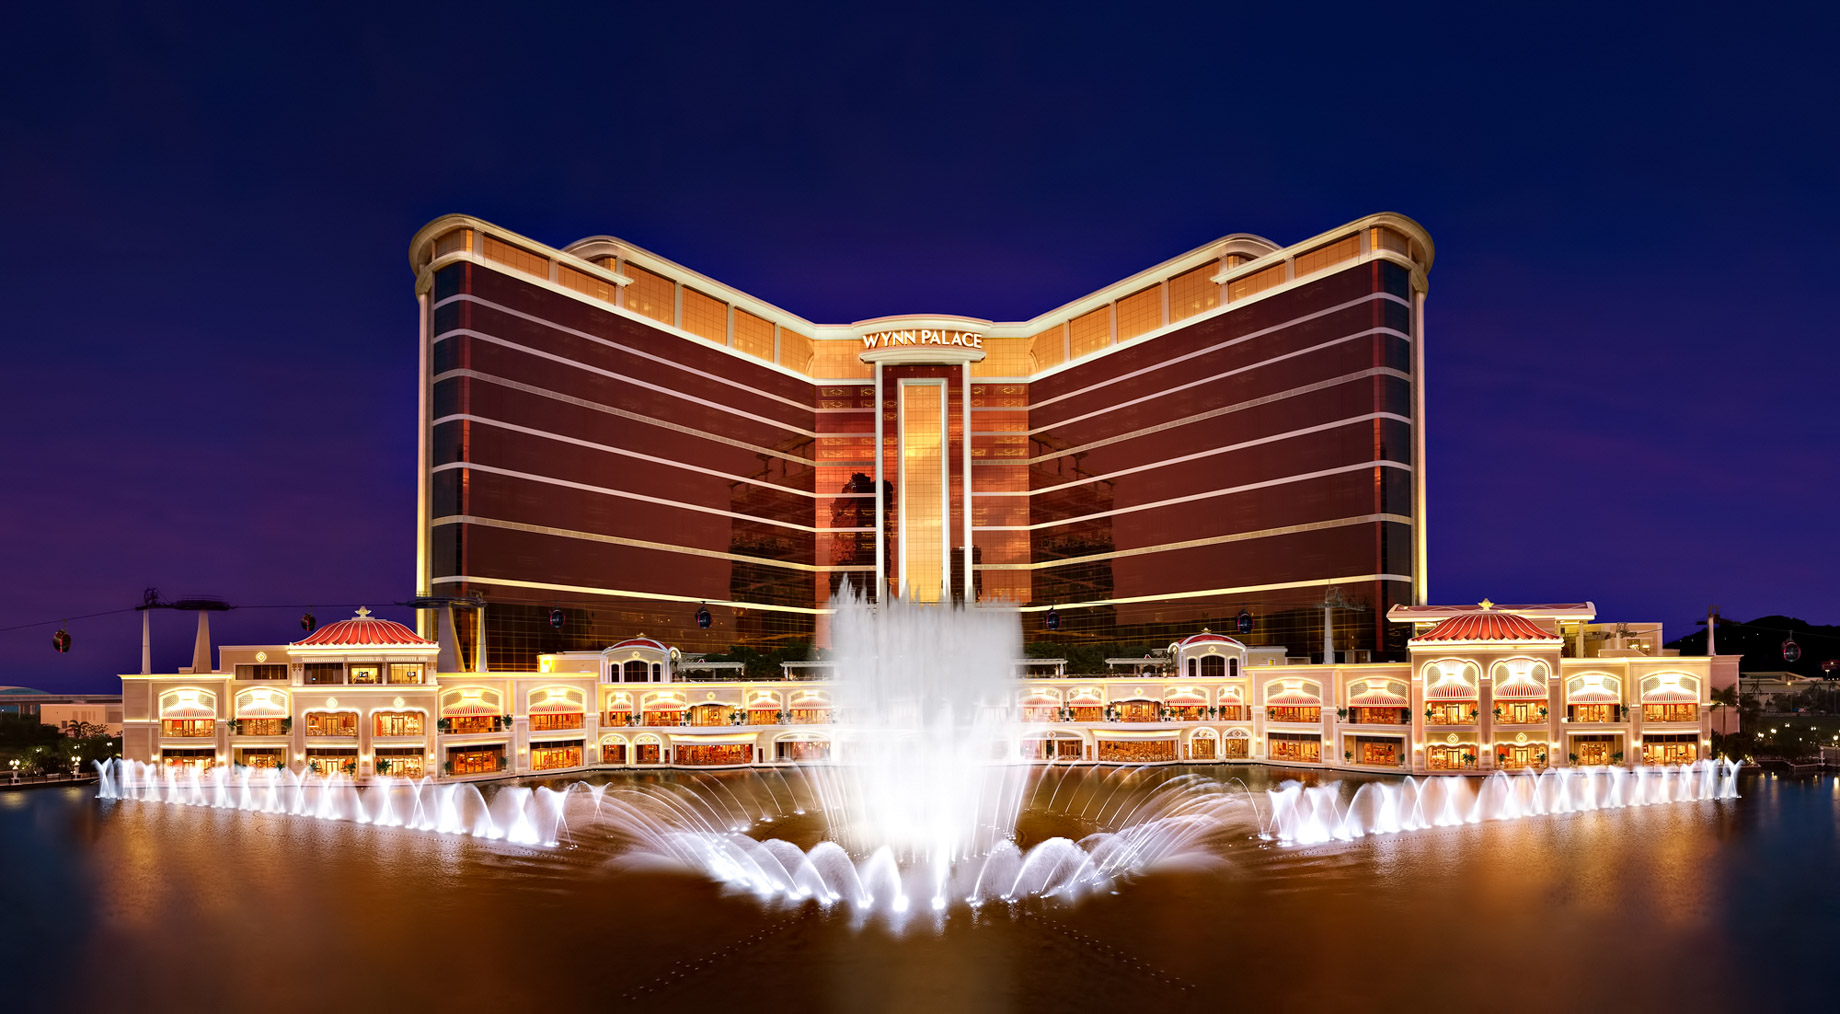 Wynn Palace Macau - Billion Dollar Buildings - The Most Expensive Casino Properties in the World